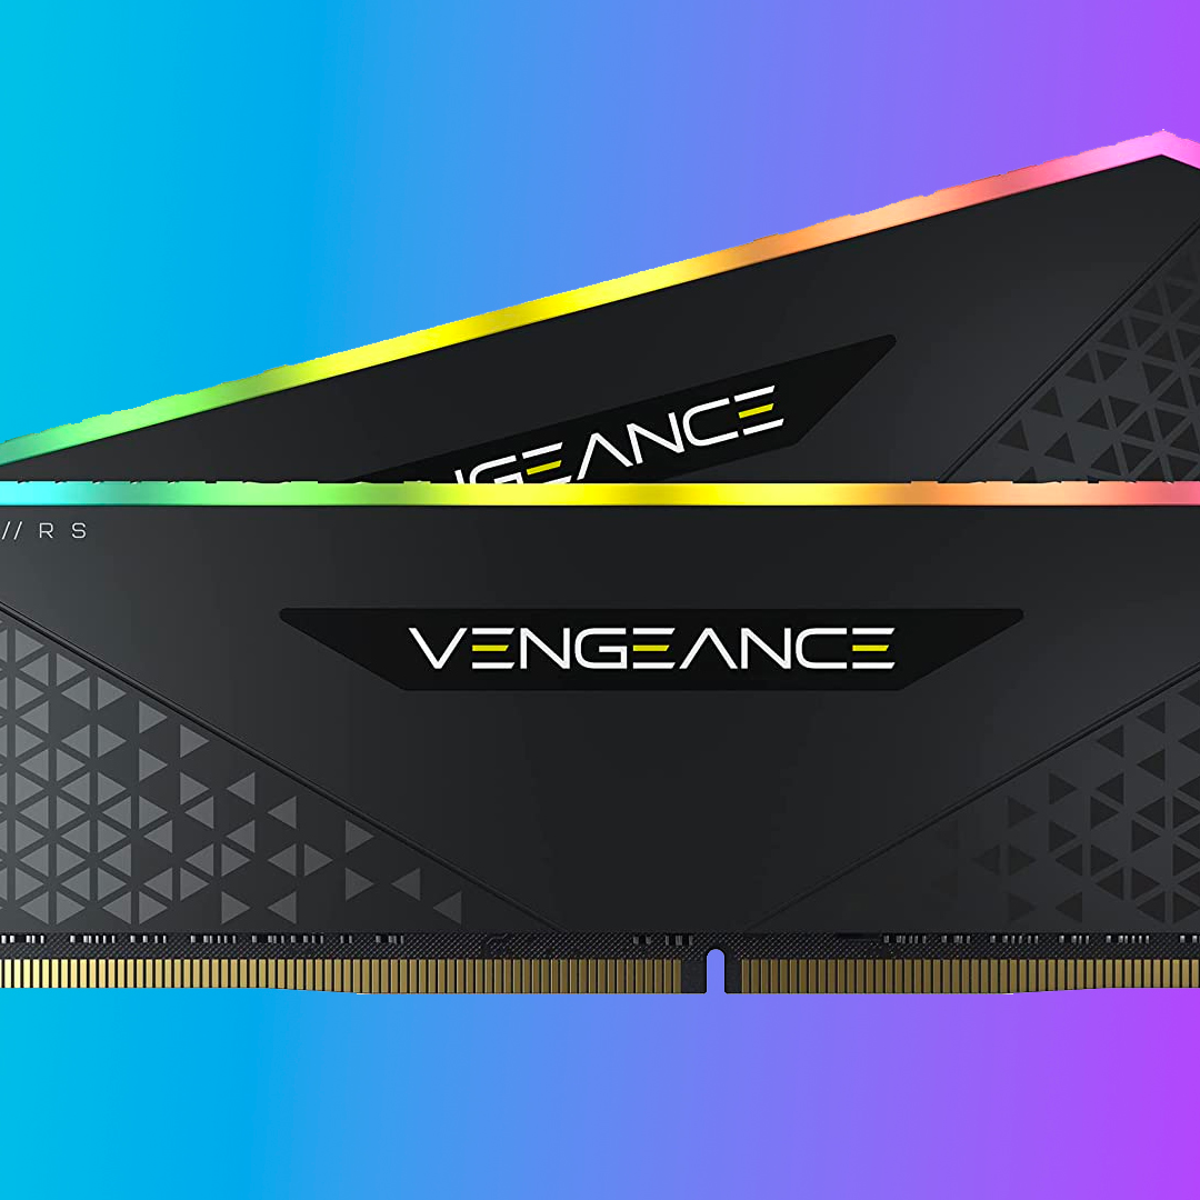 Grab 32GB of solid Corsair Vengeance RGB RS DDR4 RAM for £79 from Amazon